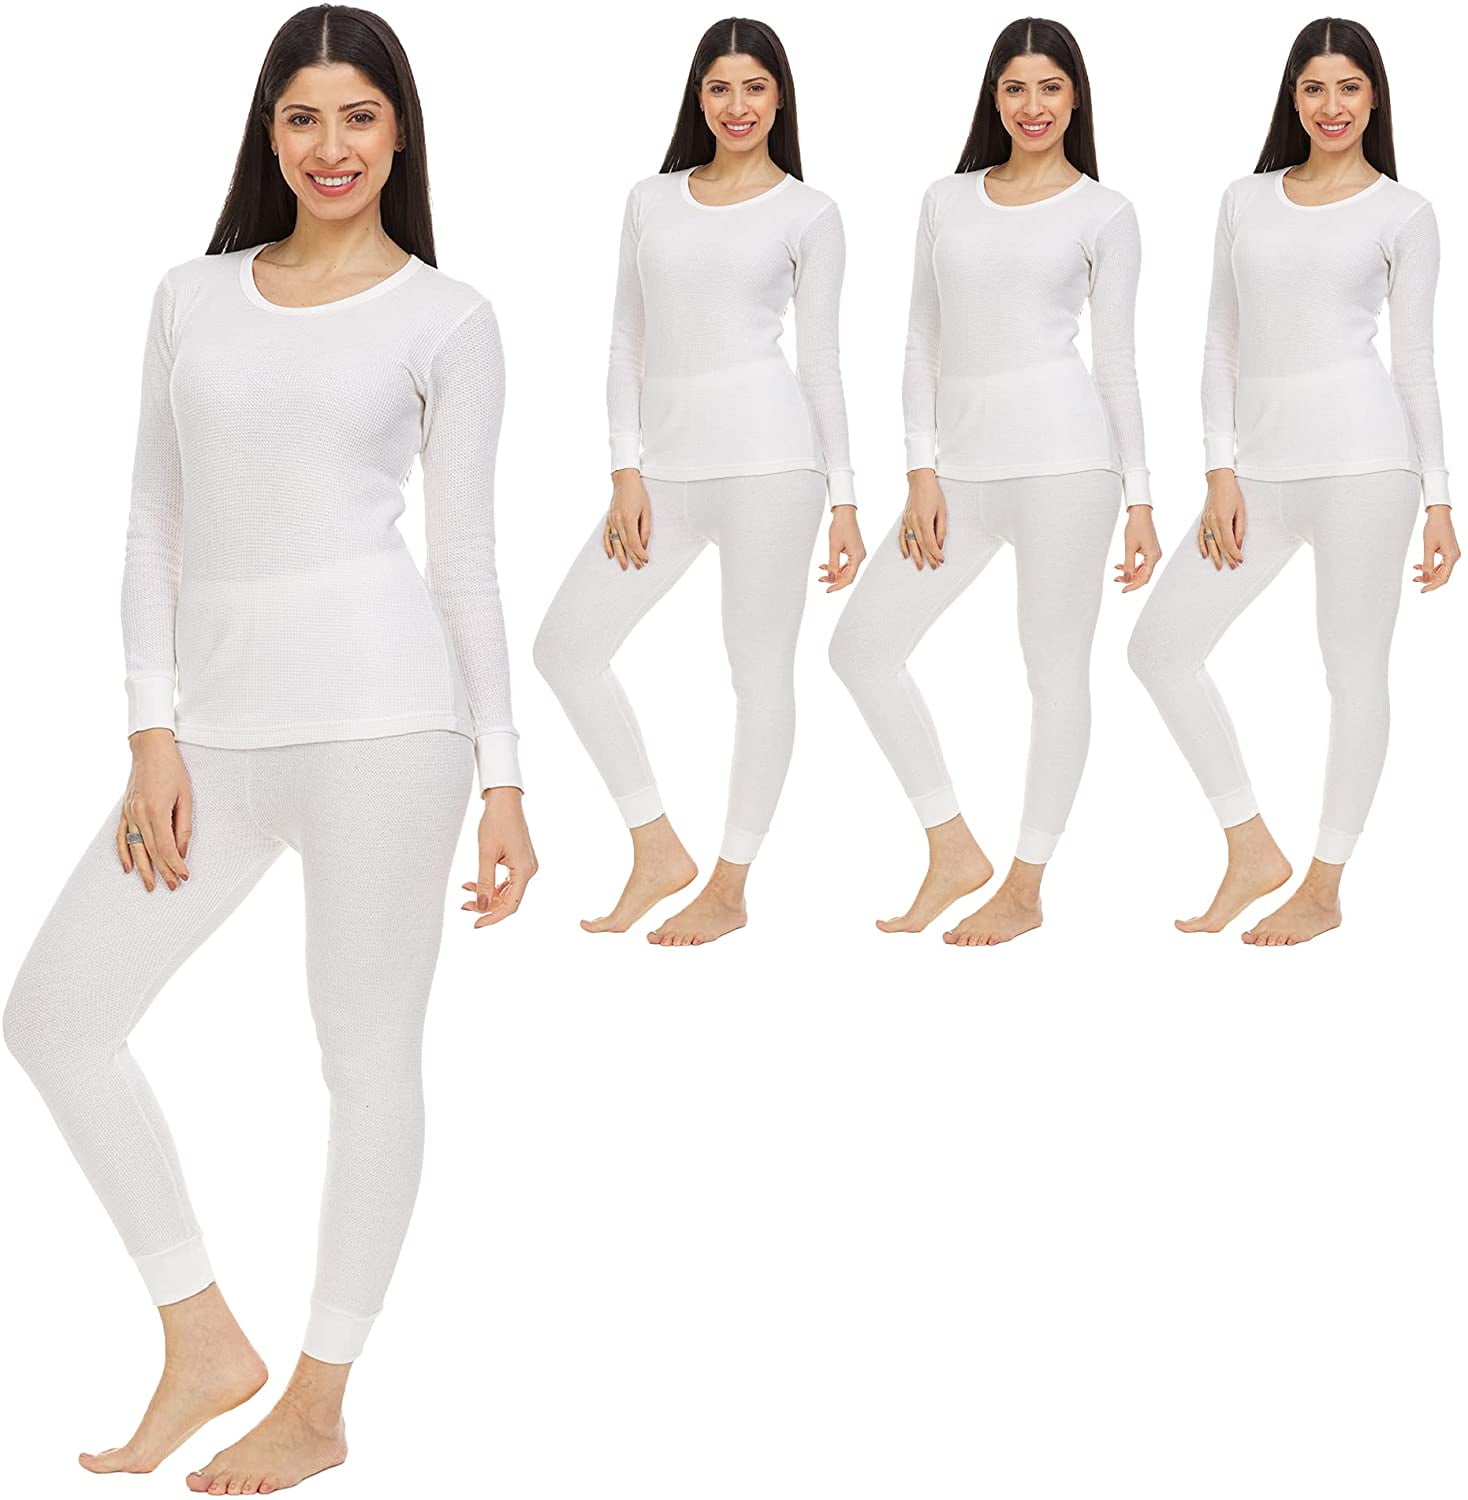 2pc Thermal Sets for Womens,Base Layer Long Johns Underwear,Top &  Bottom,Cotton,Solid Colors (18 PACK PURPAL,Large)